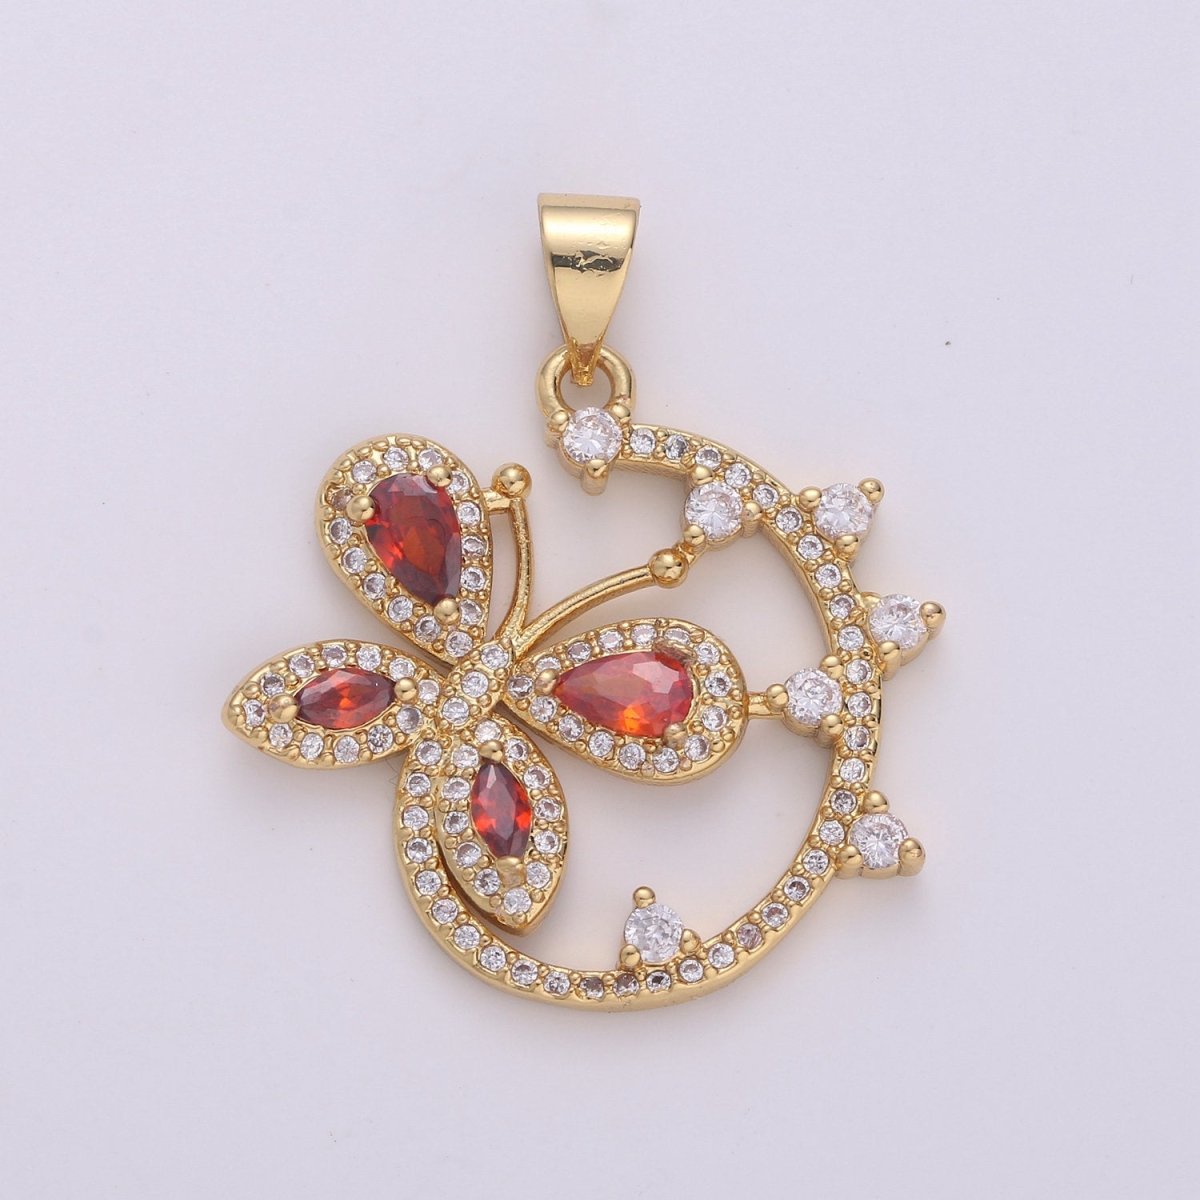 Dainty 24k Gold Filled Micro Pave Butterfly Charm, Ruby Cubic Zirconia Round Circle Pendant Charm, Gold Filled Charm, For DIY Jewelry I-852 - DLUXCA